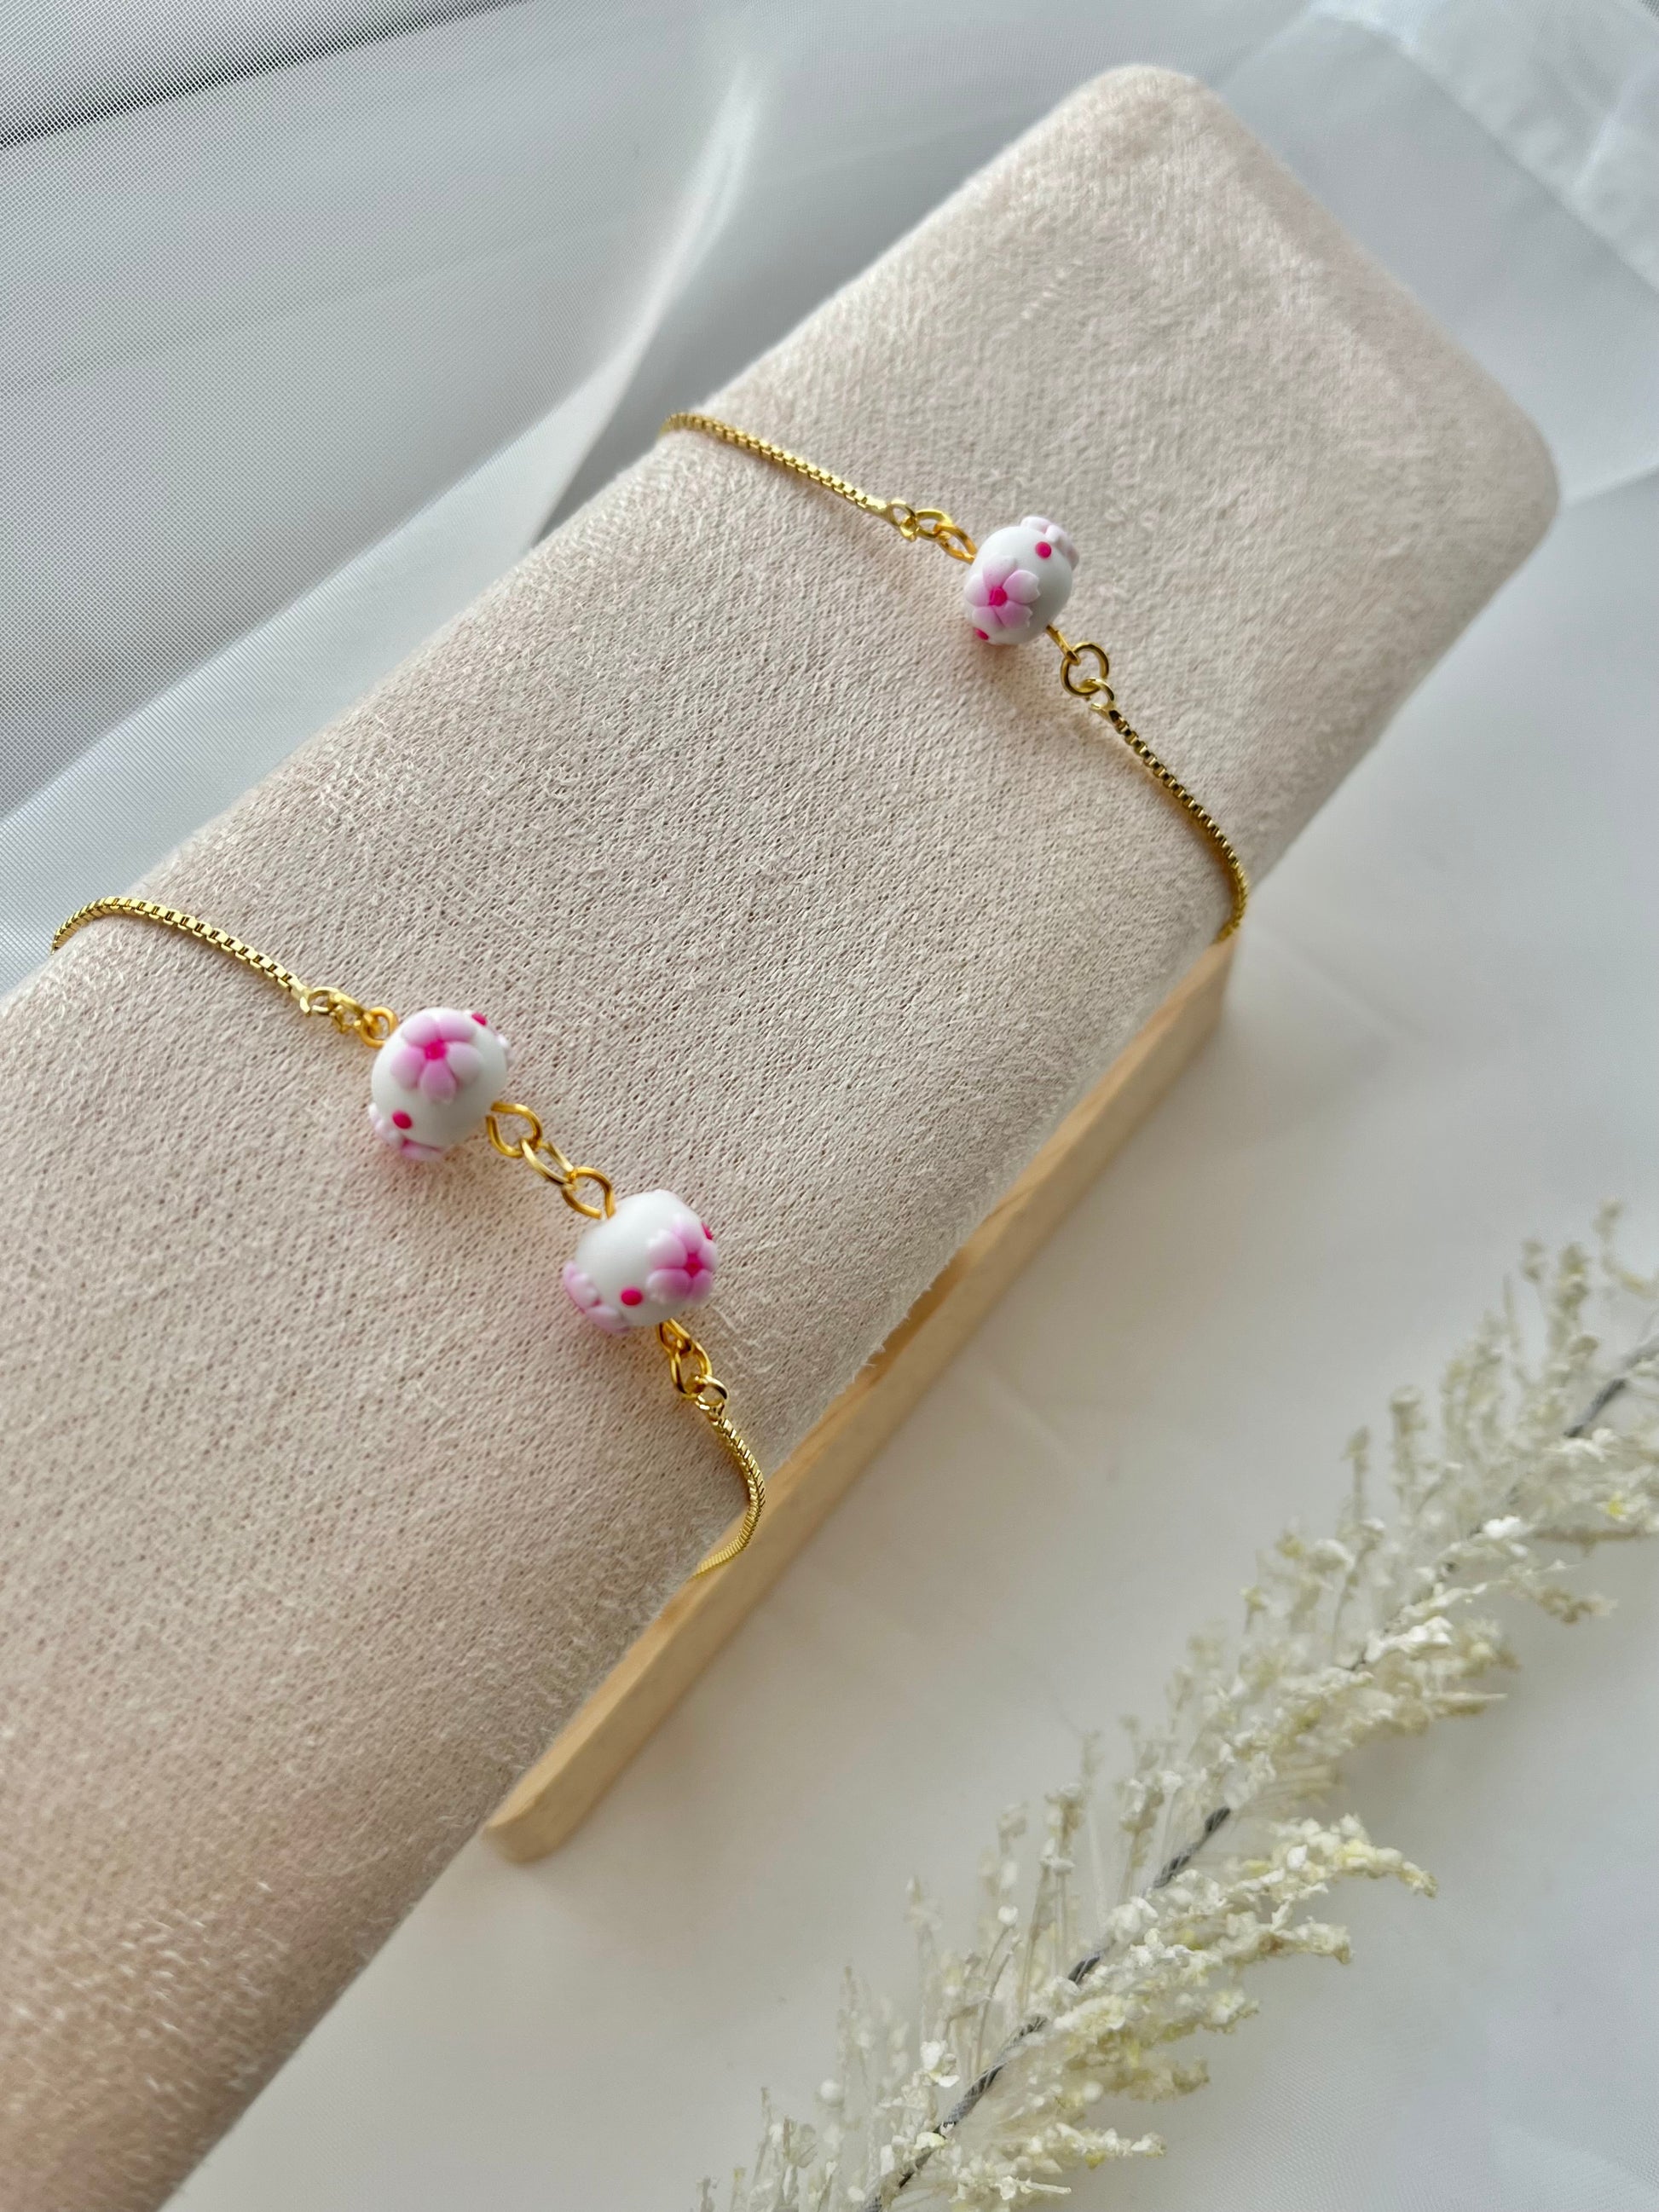 Two floral bracelet in cherry blossom style on a bracelet stand